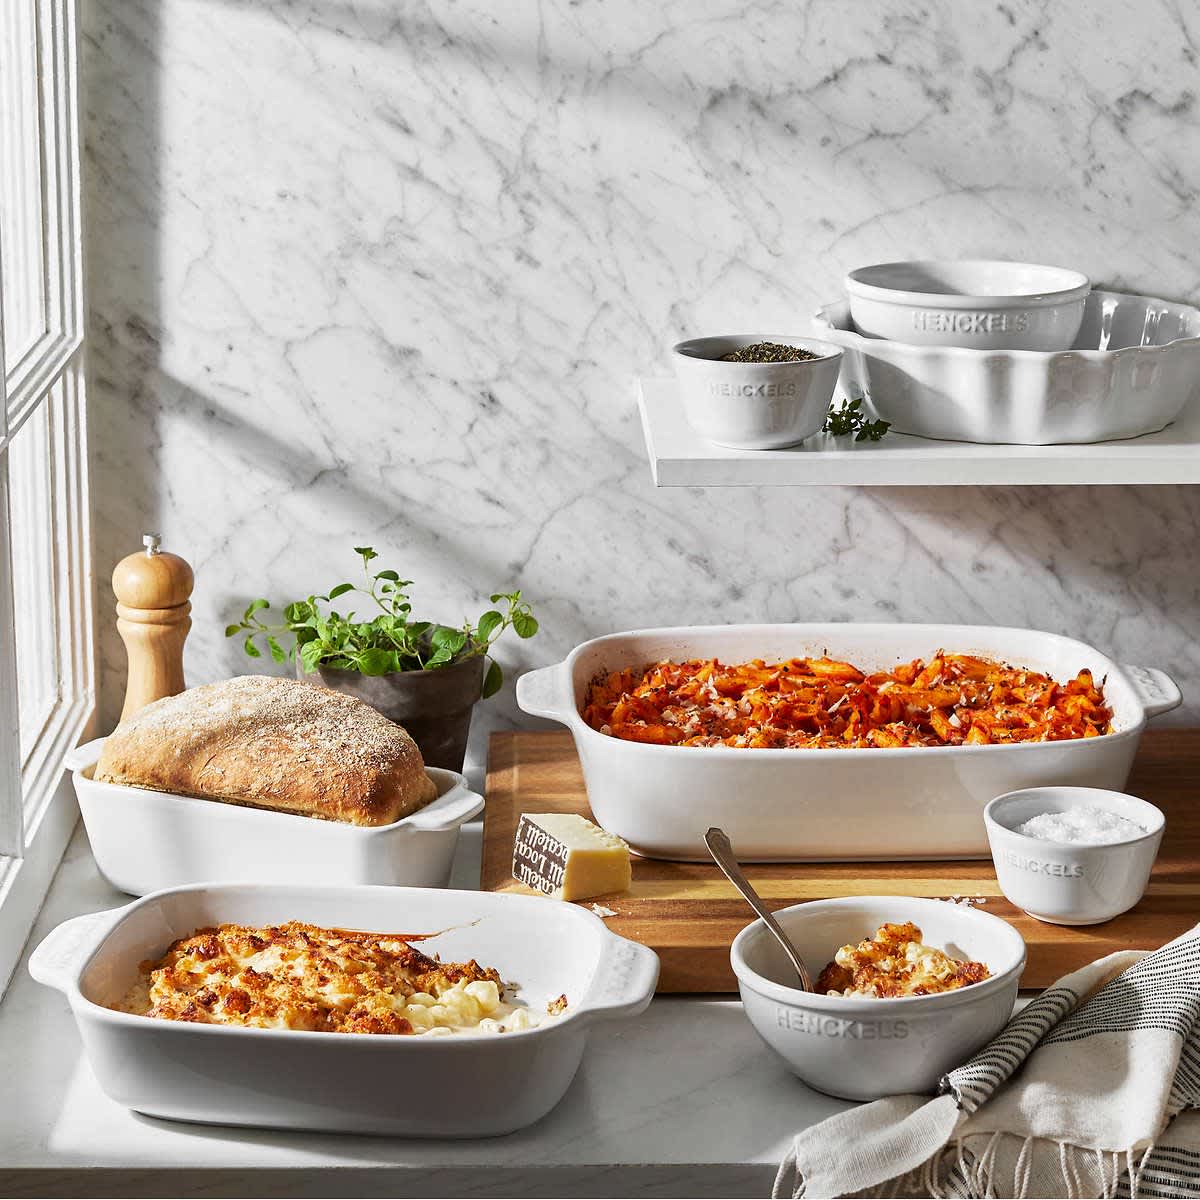 Rubbermaid DuraLite Glass Bakeware, 4-Piece Set w/ Lids, Baking Dishes or  Casserole Dishes, 9 x 13 and 8 x 12 & Reviews